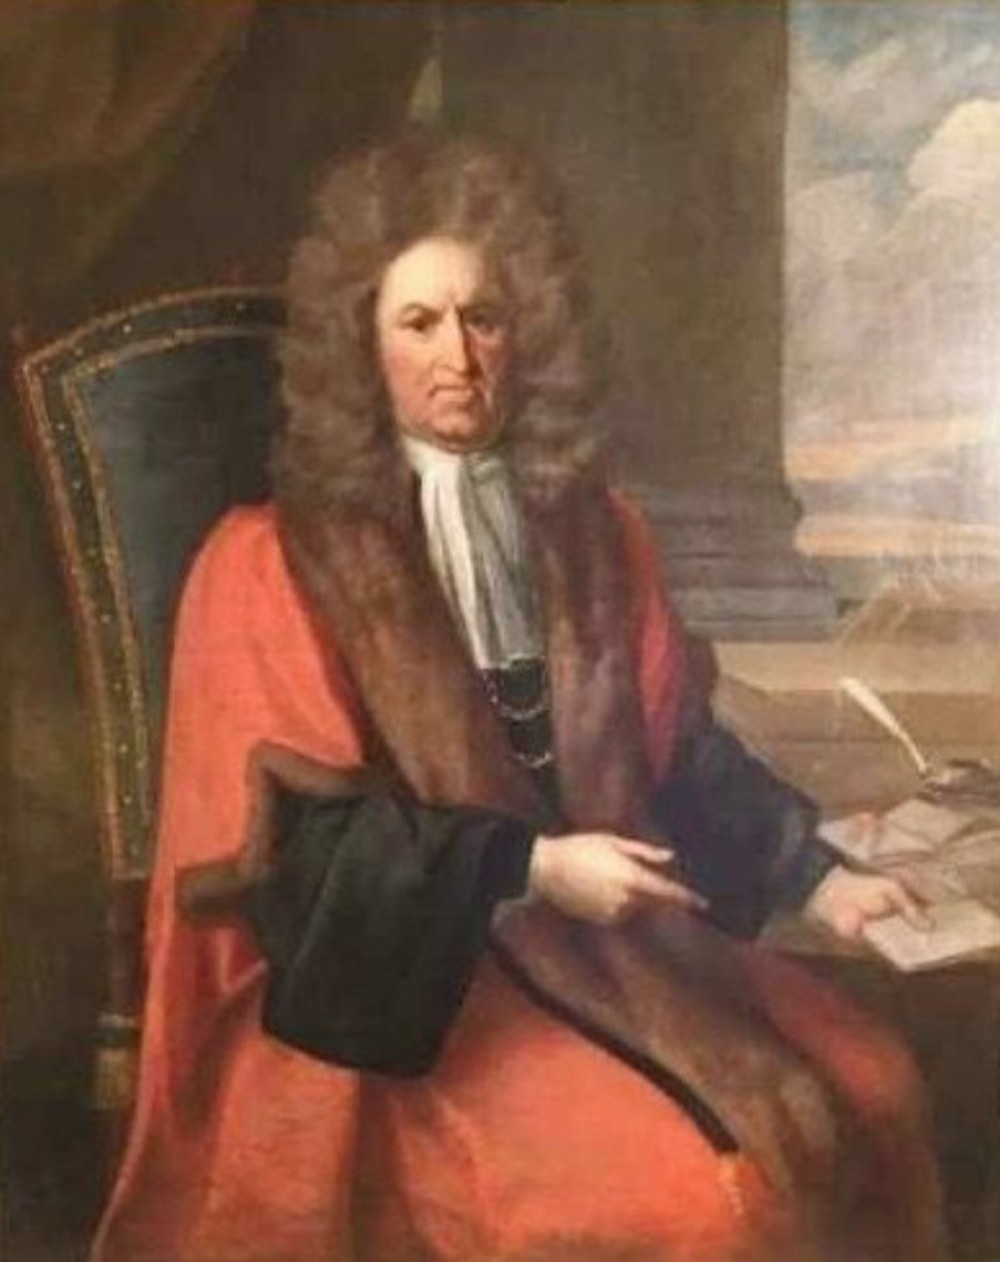 judge robert dormer mp by thomas hill 17th oil portraits large paintings 57 x 48 inches